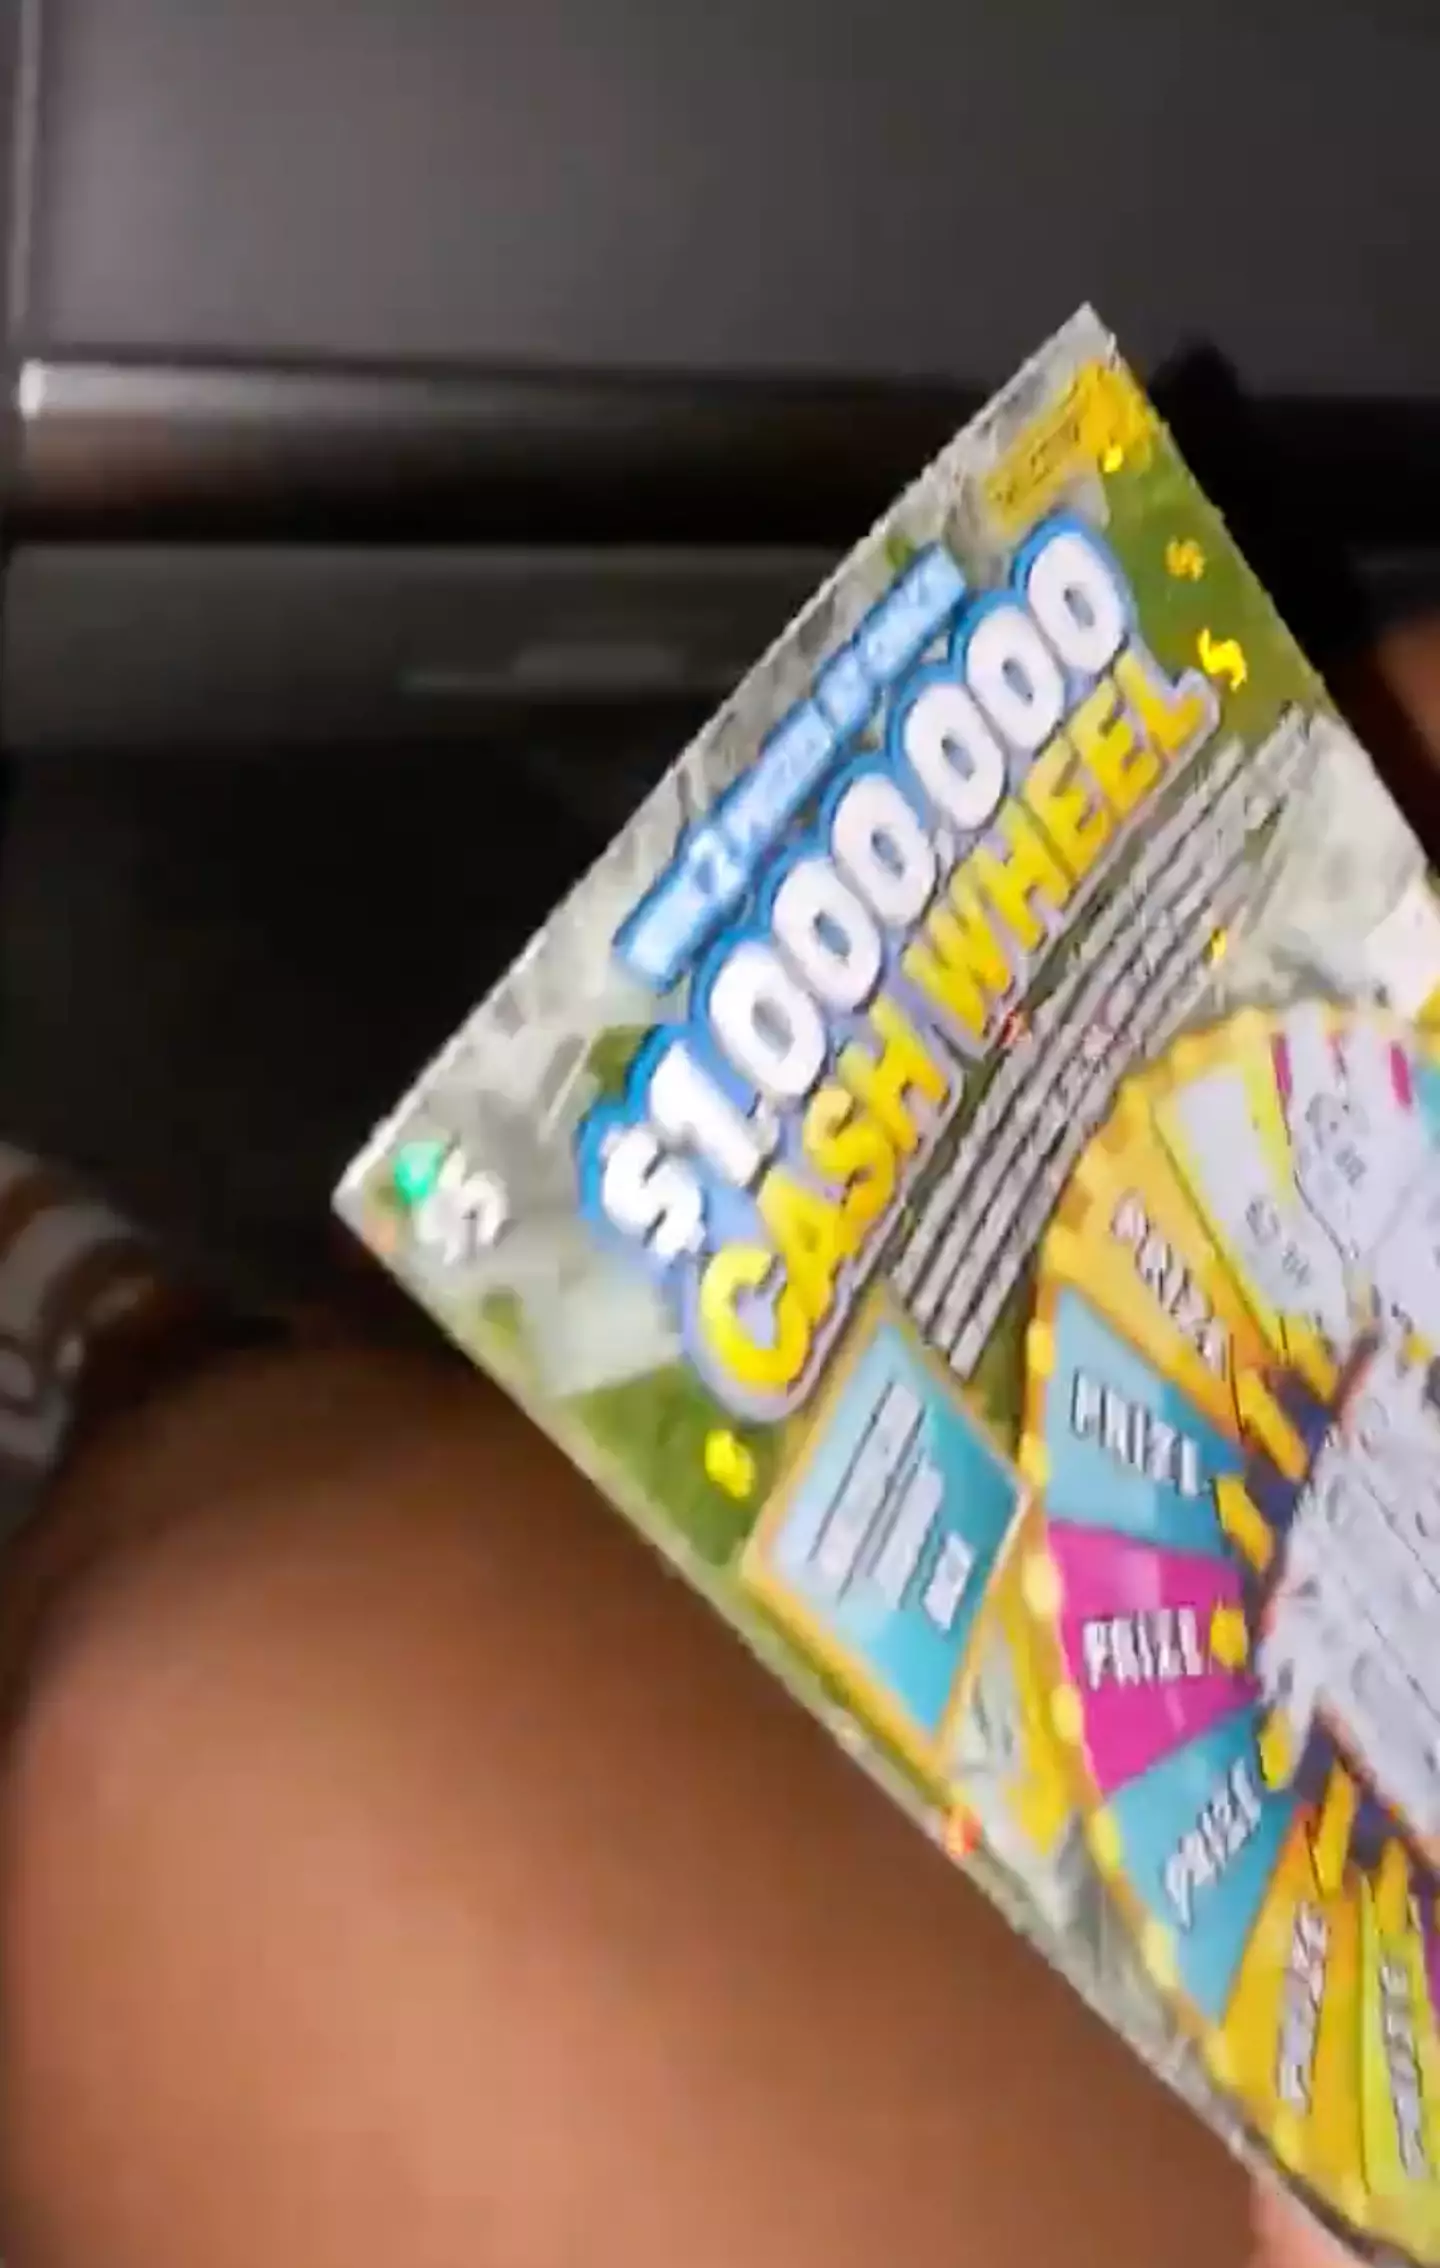 She shows off the winning scratchcard in the video.